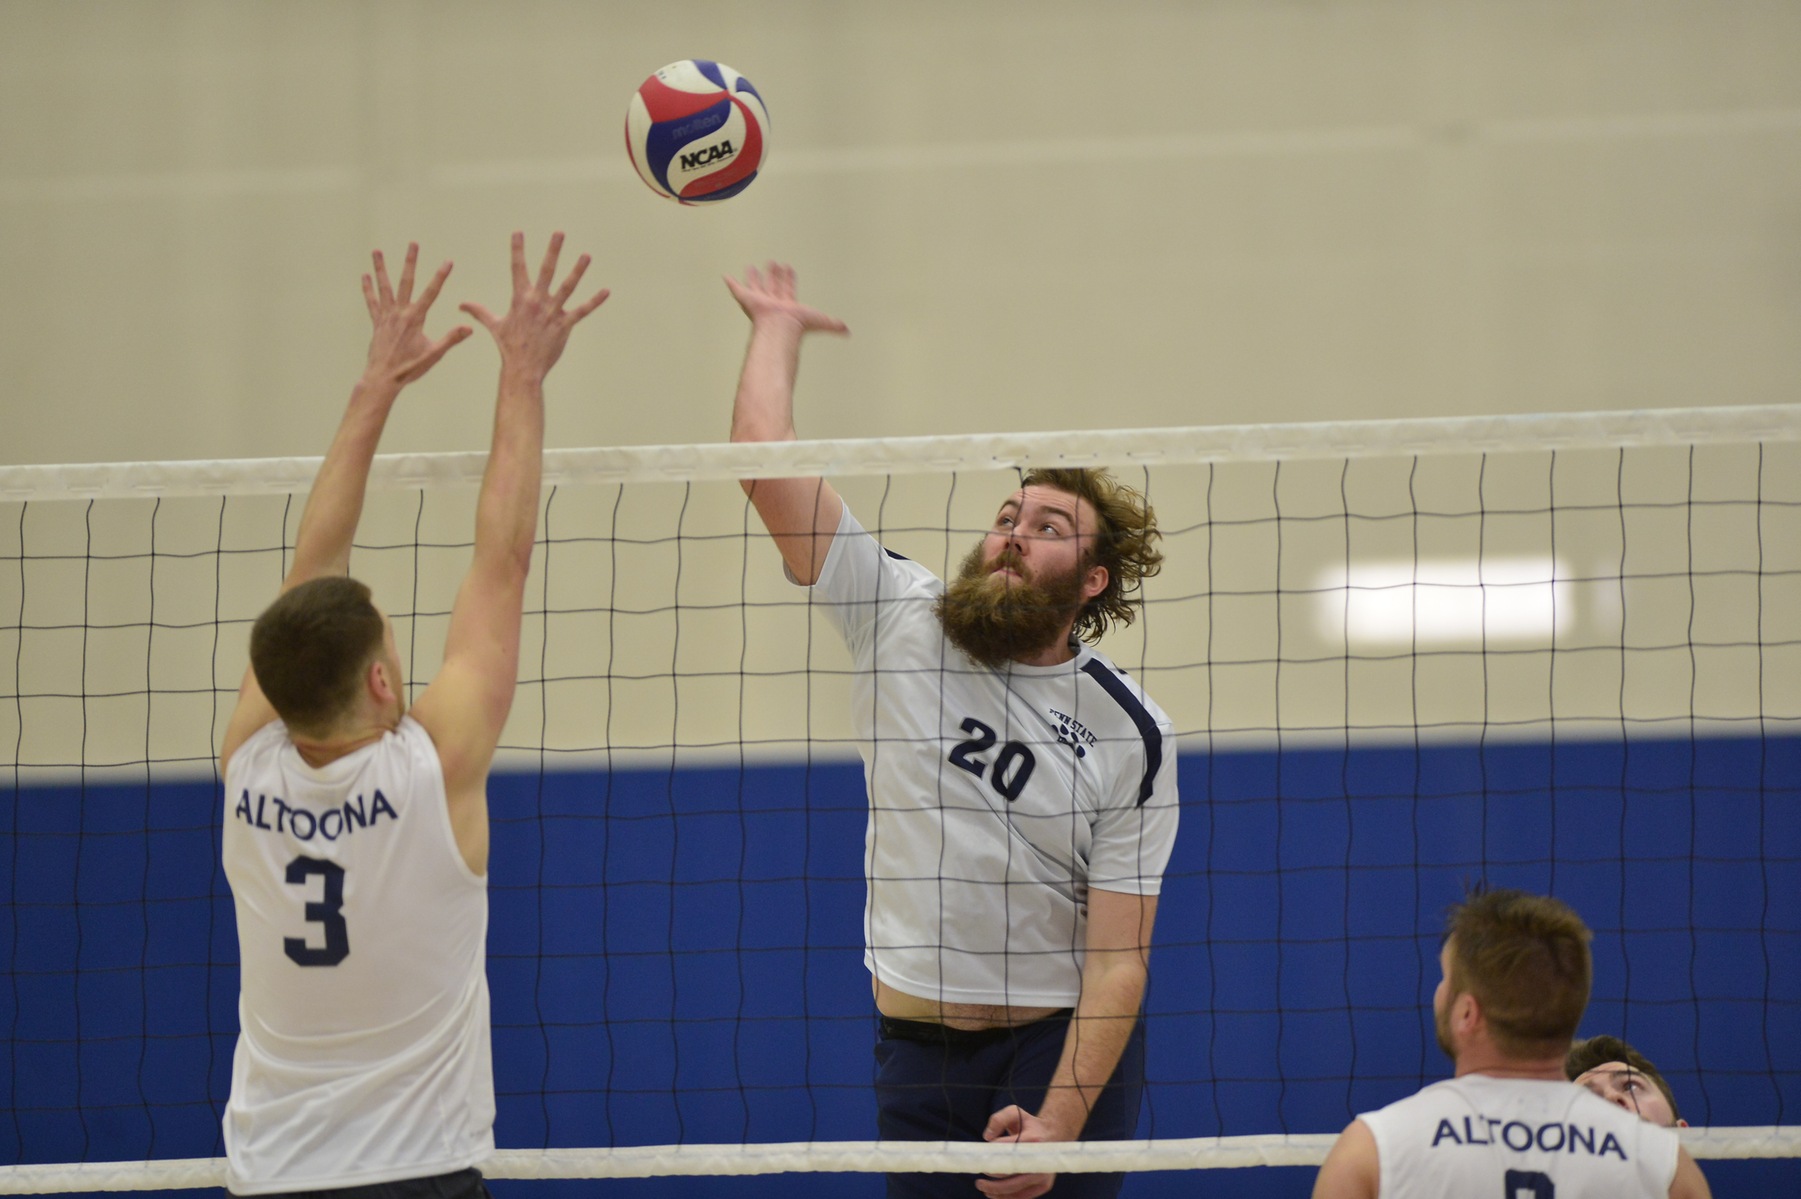 Medaille Edges Men's Volleyball in Five